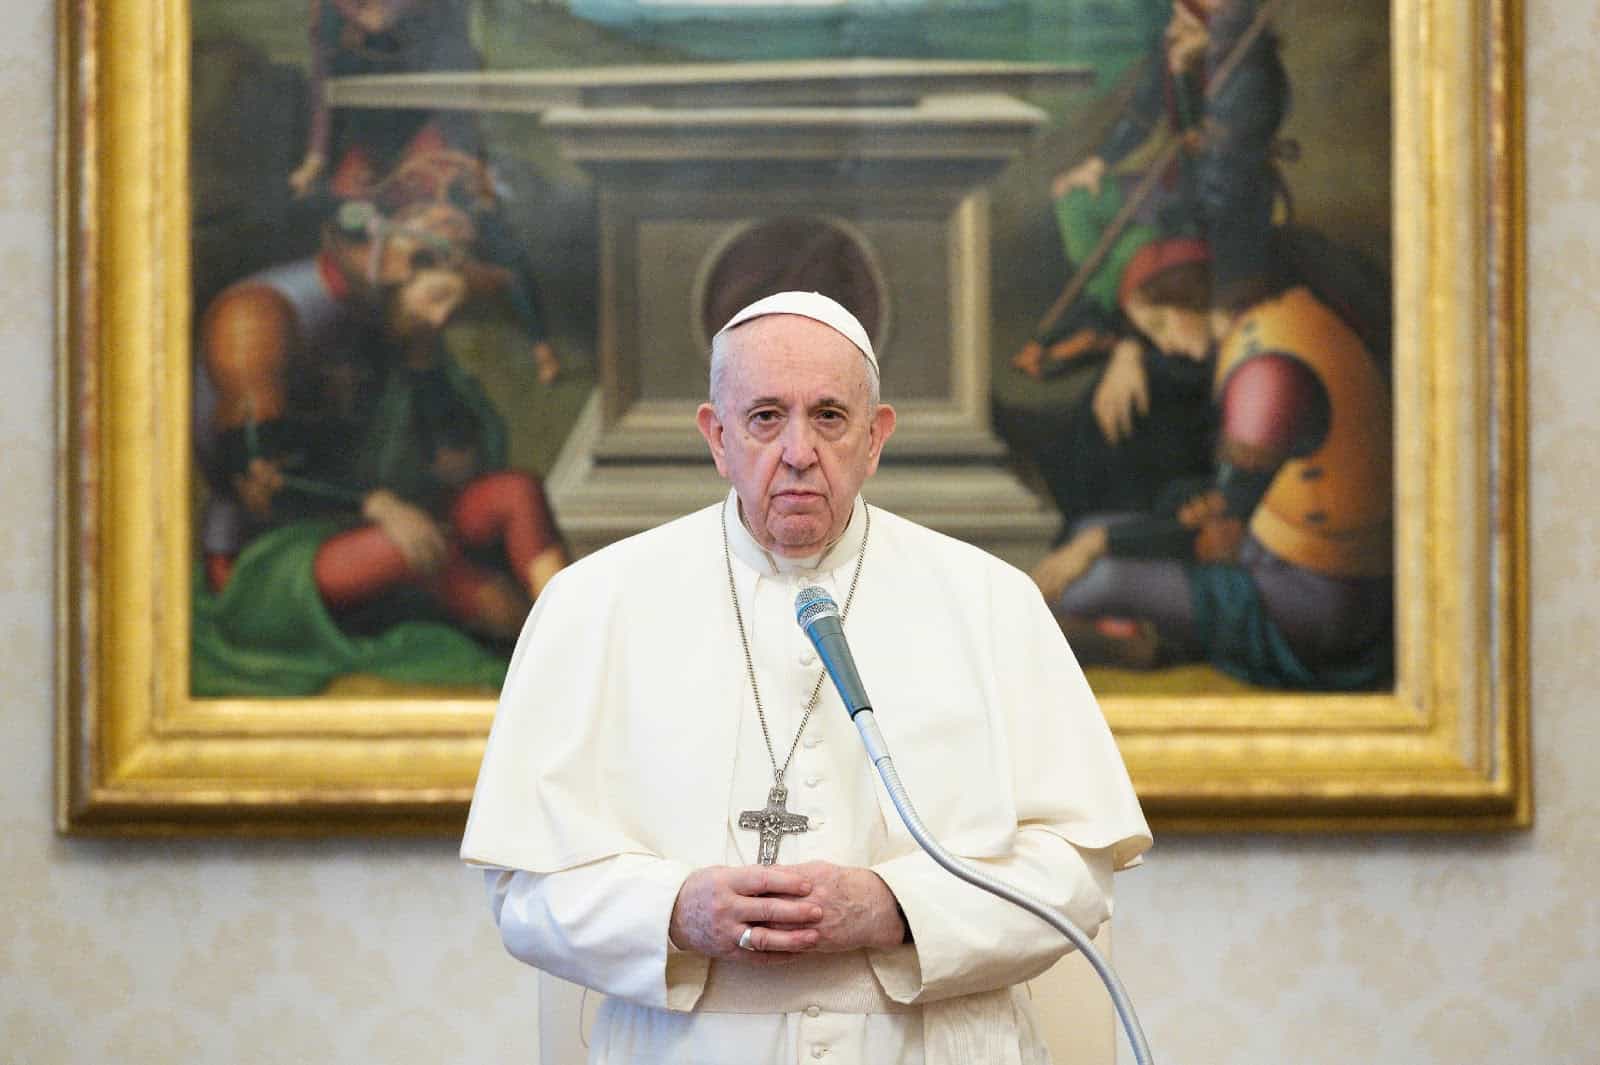 Pope Francis and the Inclusive Capitalists: Making Friends with Dishonest Wealth?